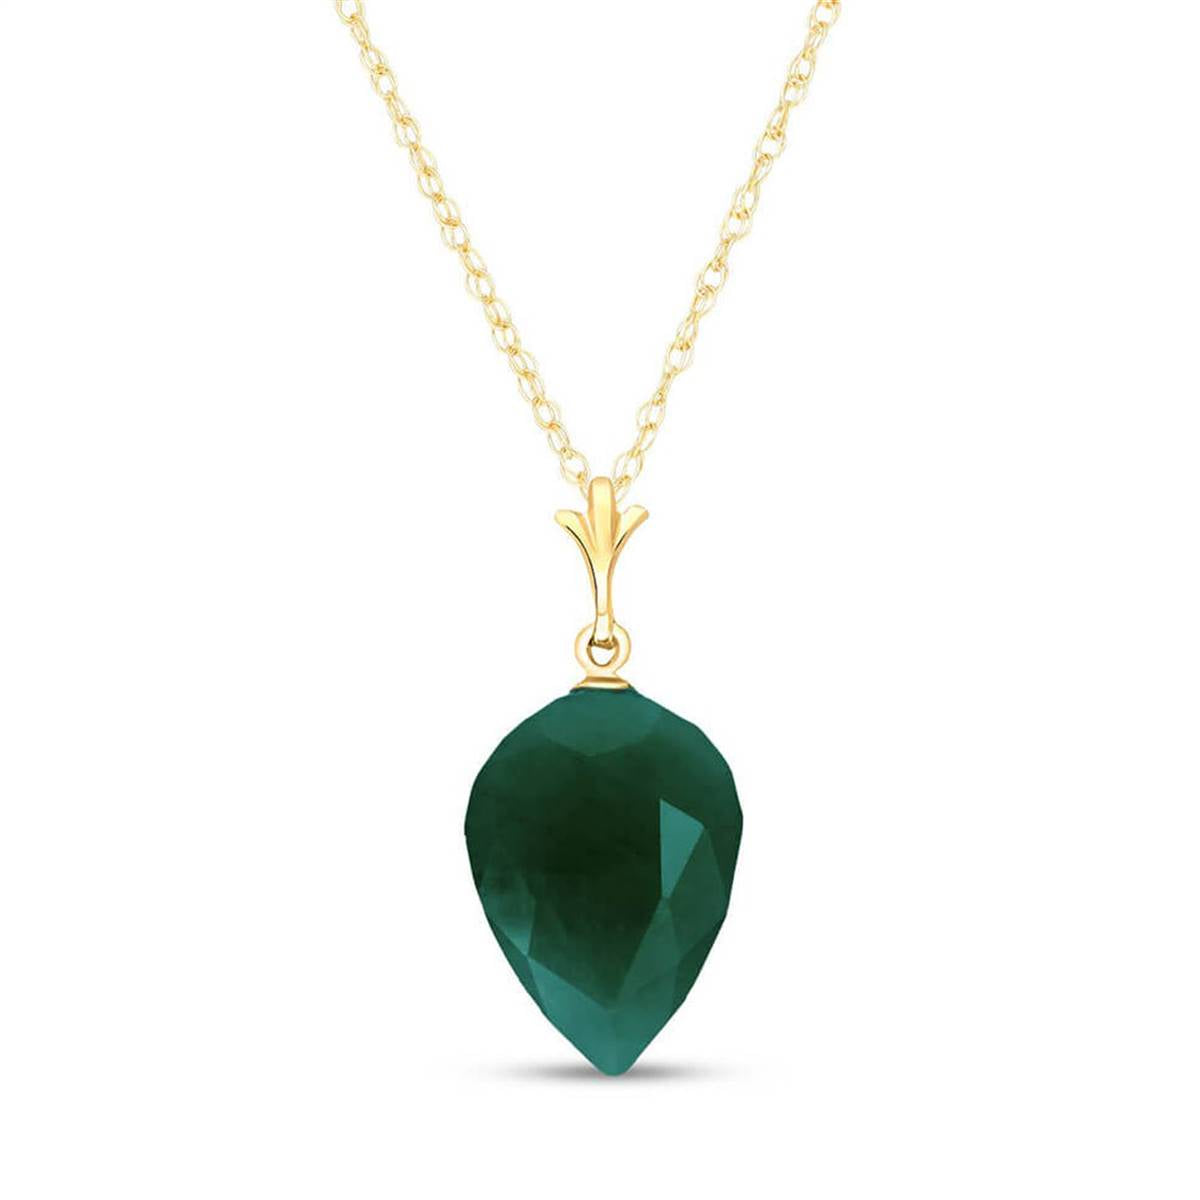 12.9 Carat 14K Solid Yellow Gold Necklace Pointy Briolette Drop Emerald